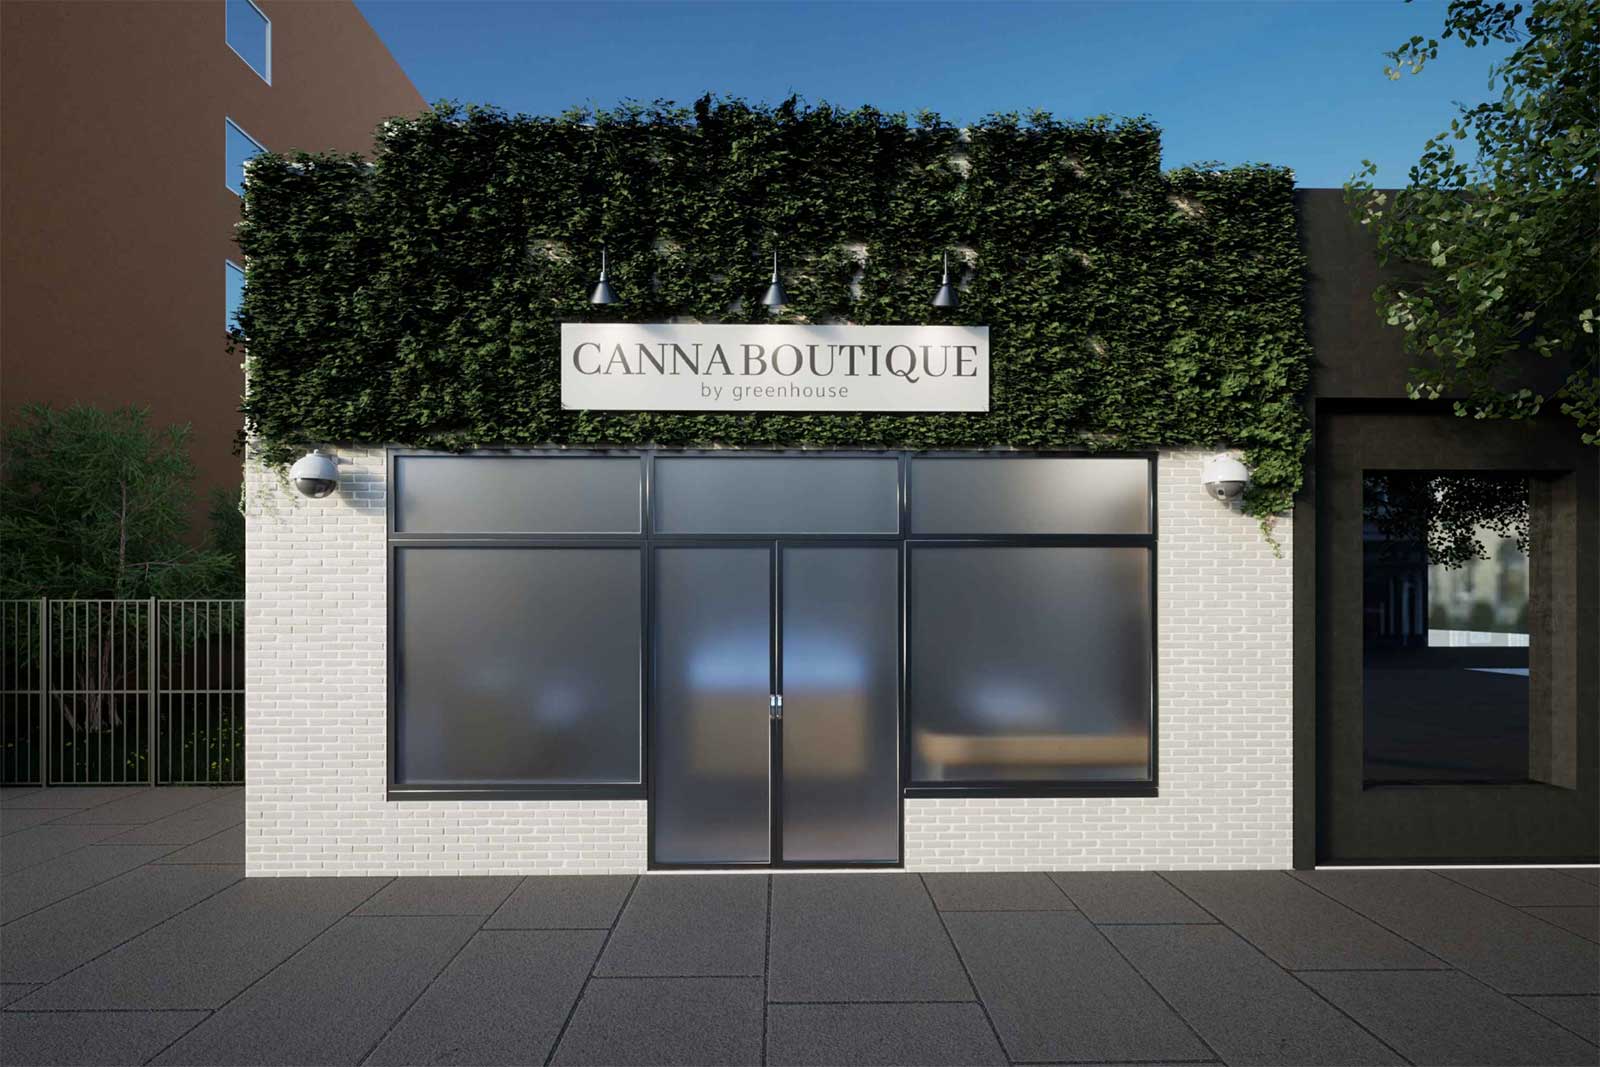 Cannaboutique Jersey City